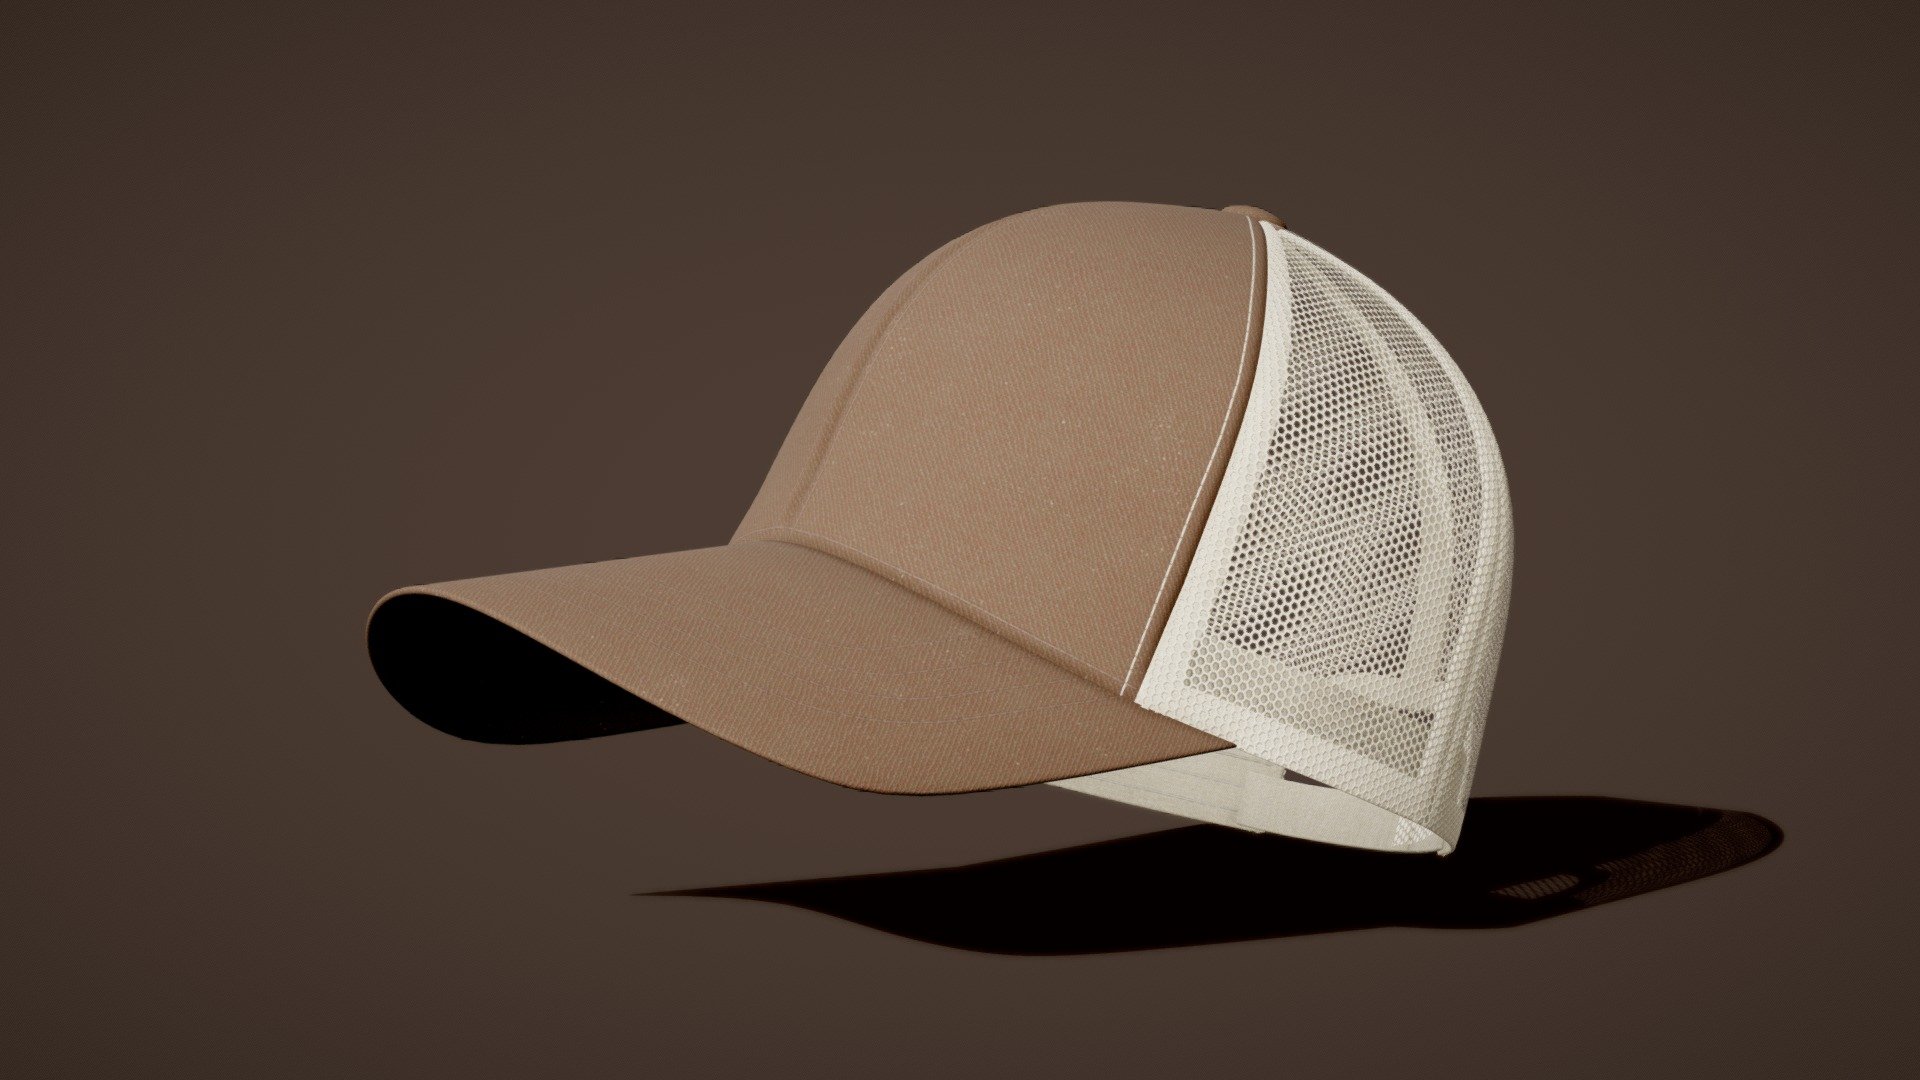 Its a Baseball Cap model,

Mesh - Low poly

Metarial - 1

Texture - 4k

Feel free to comment for review of this model or any suggestions 3d model